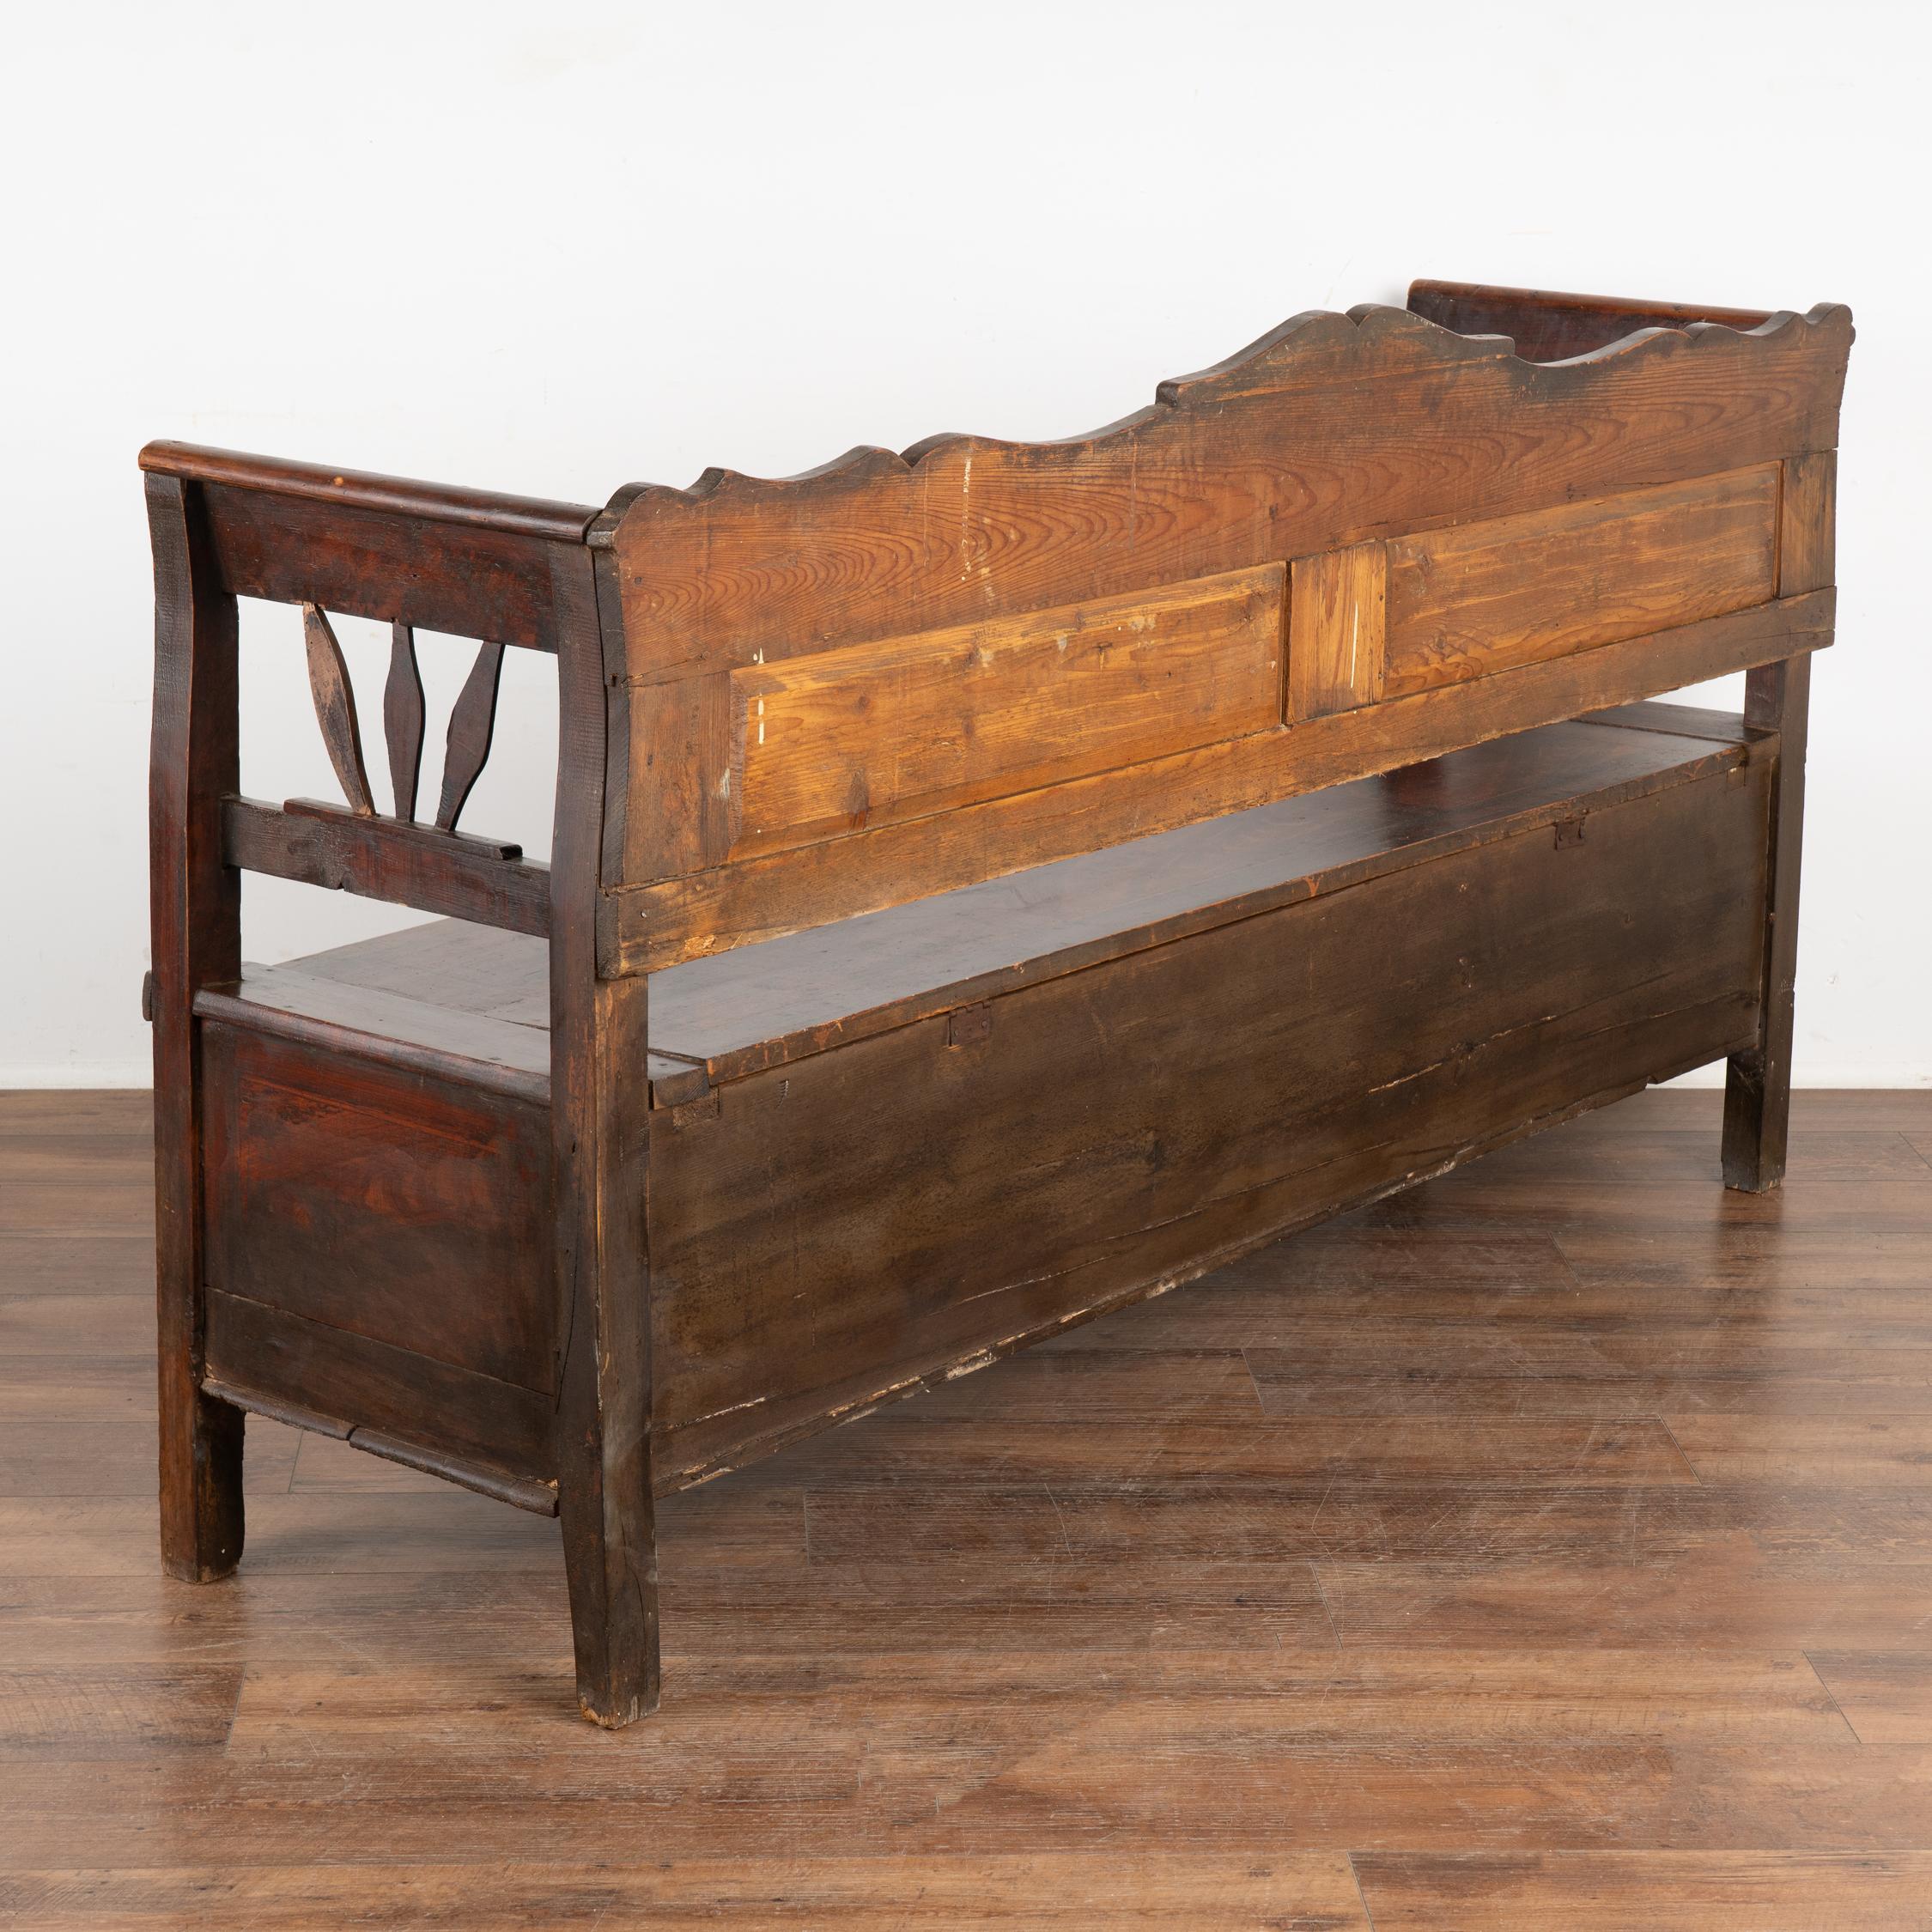 Original Painted Brown Bench With Storage, Hungary Circa 1900's For Sale 6